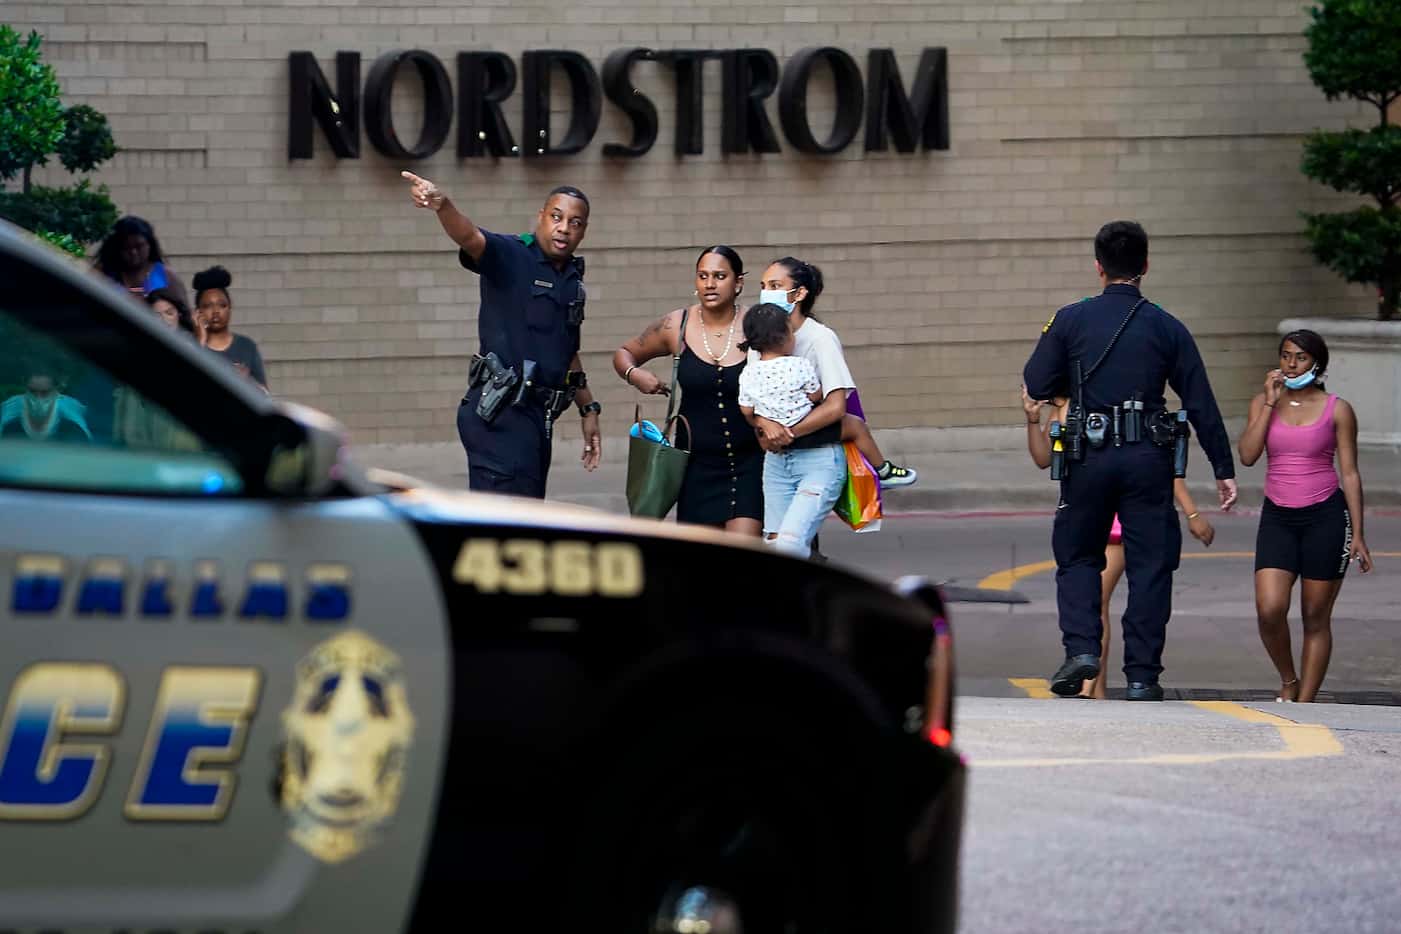 Dallas police direct people away from the Nordstrom store at the Galleria Dallas on Tuesday,...